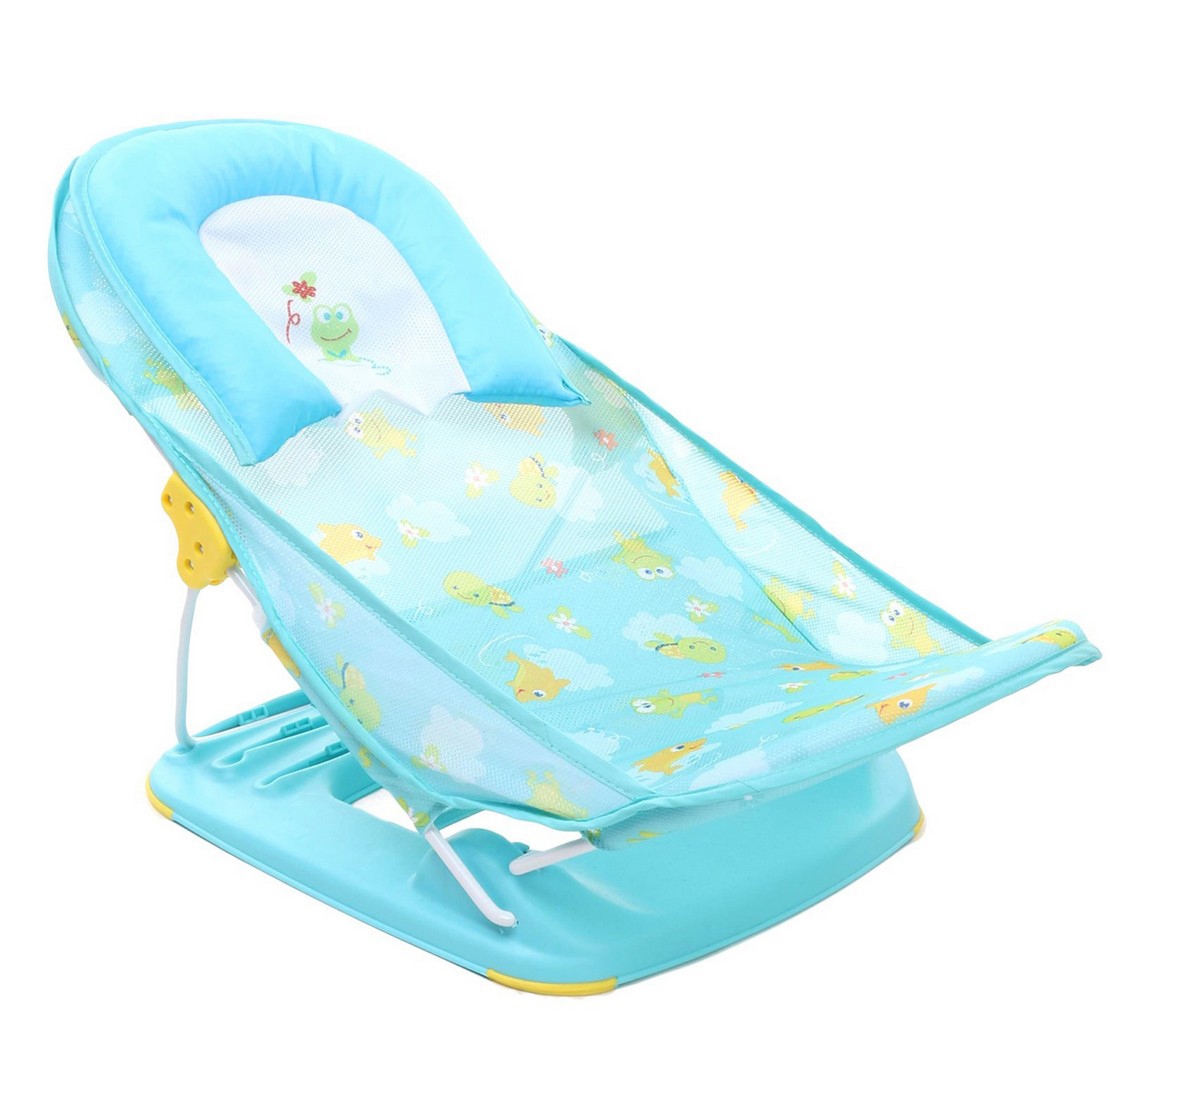 Mothercare | Mastela Deluxe Baby Bather 7460 Teal 